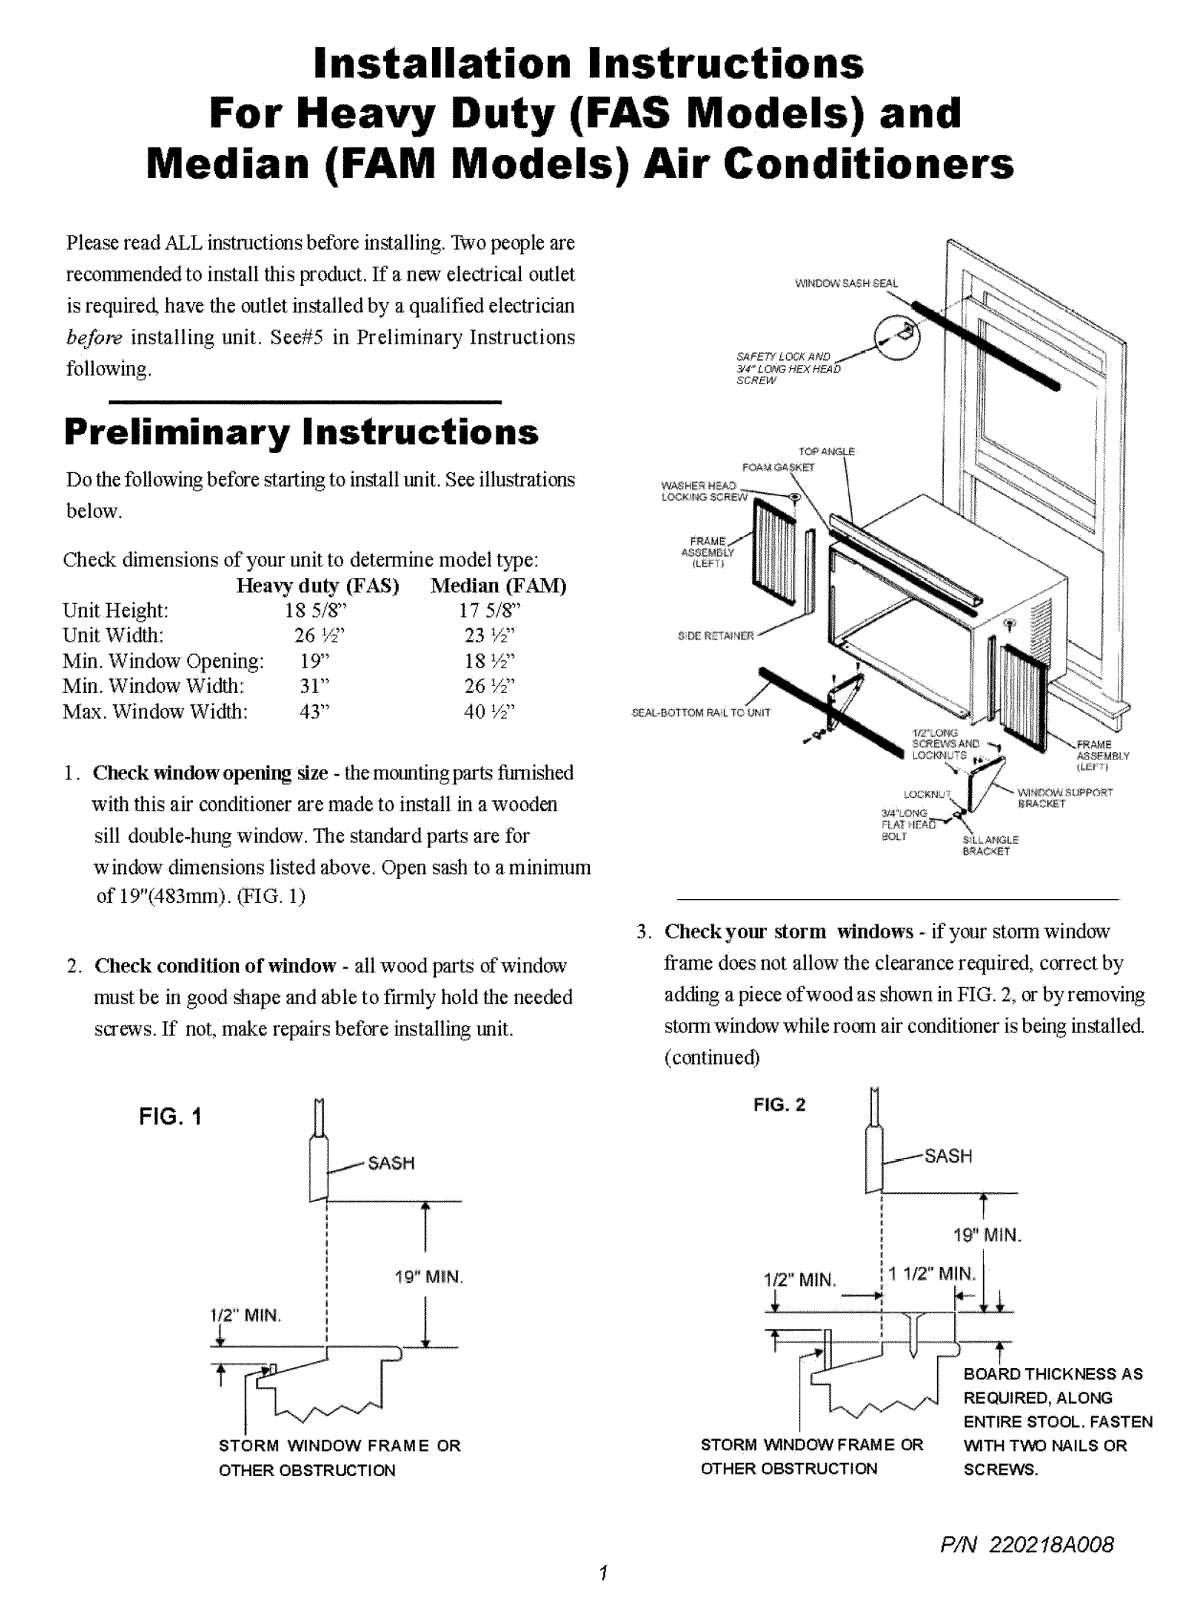 Frigidaire FAM157Q1A1, FAM157Q1A2, FAM187Q2A3, FAM187Q2A4, FAS257Q2A1 Installation Guide